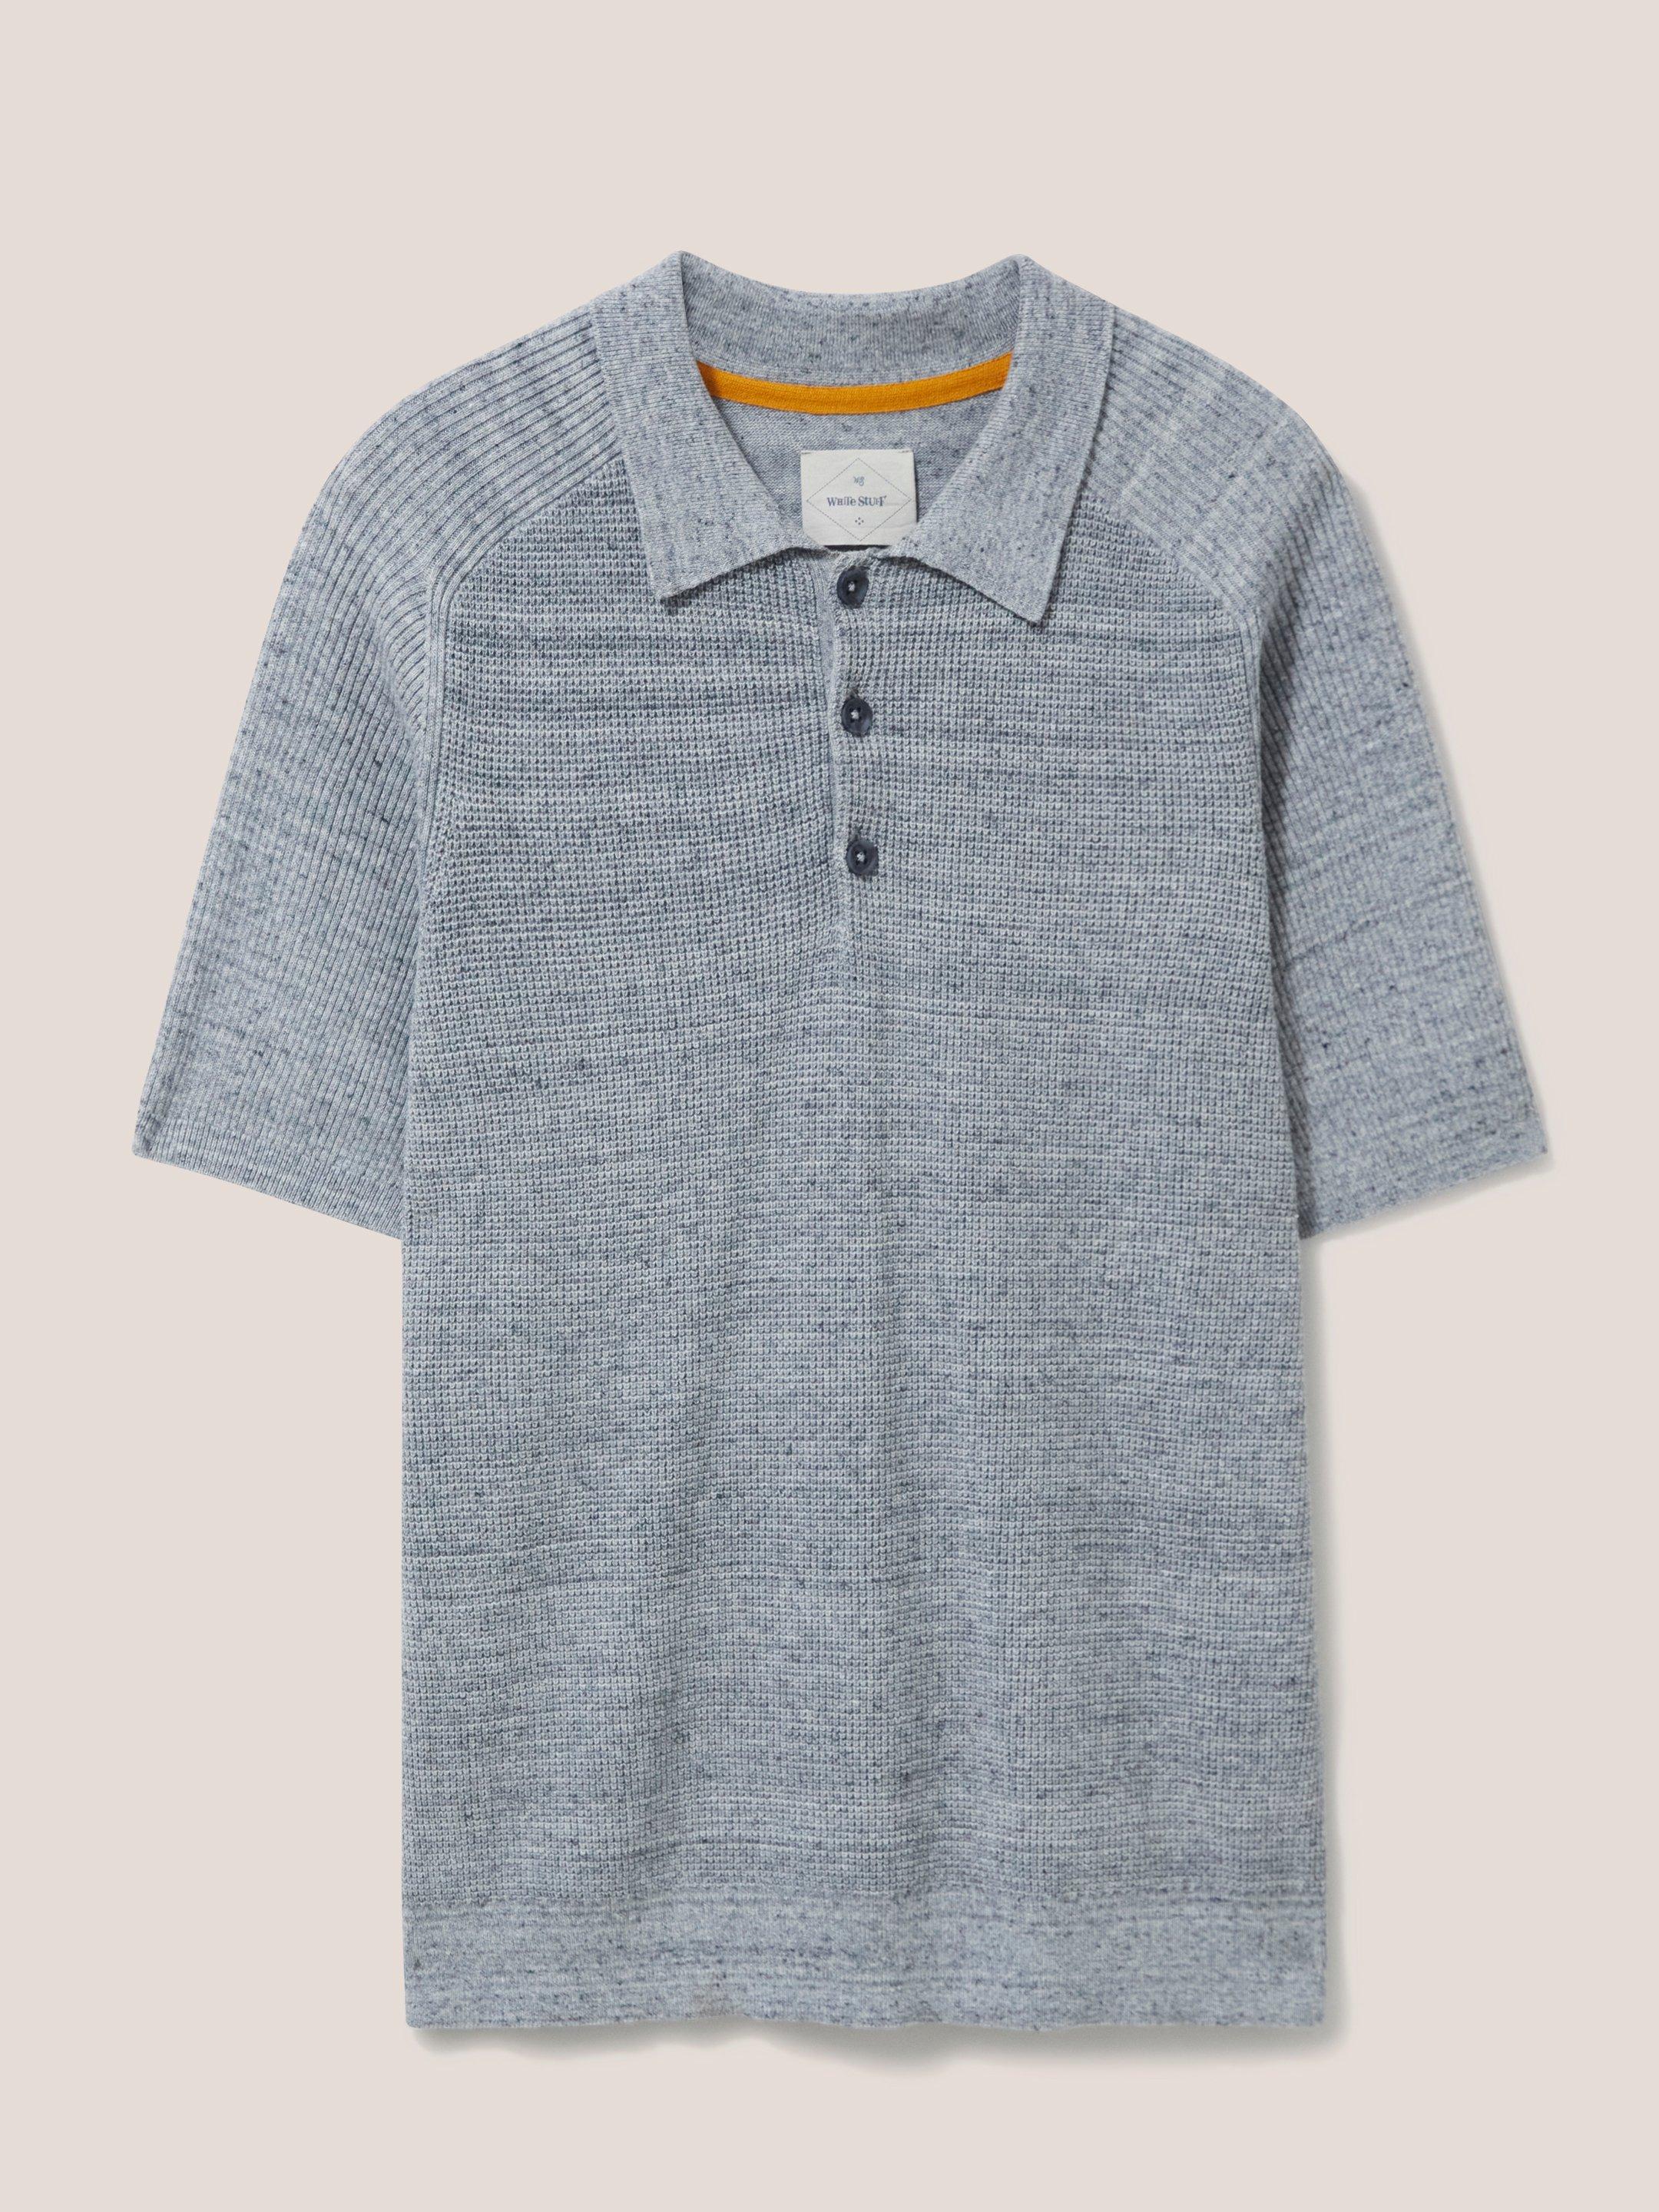 Barmouth Short Sleeve Polo in GREY MARL - FLAT FRONT